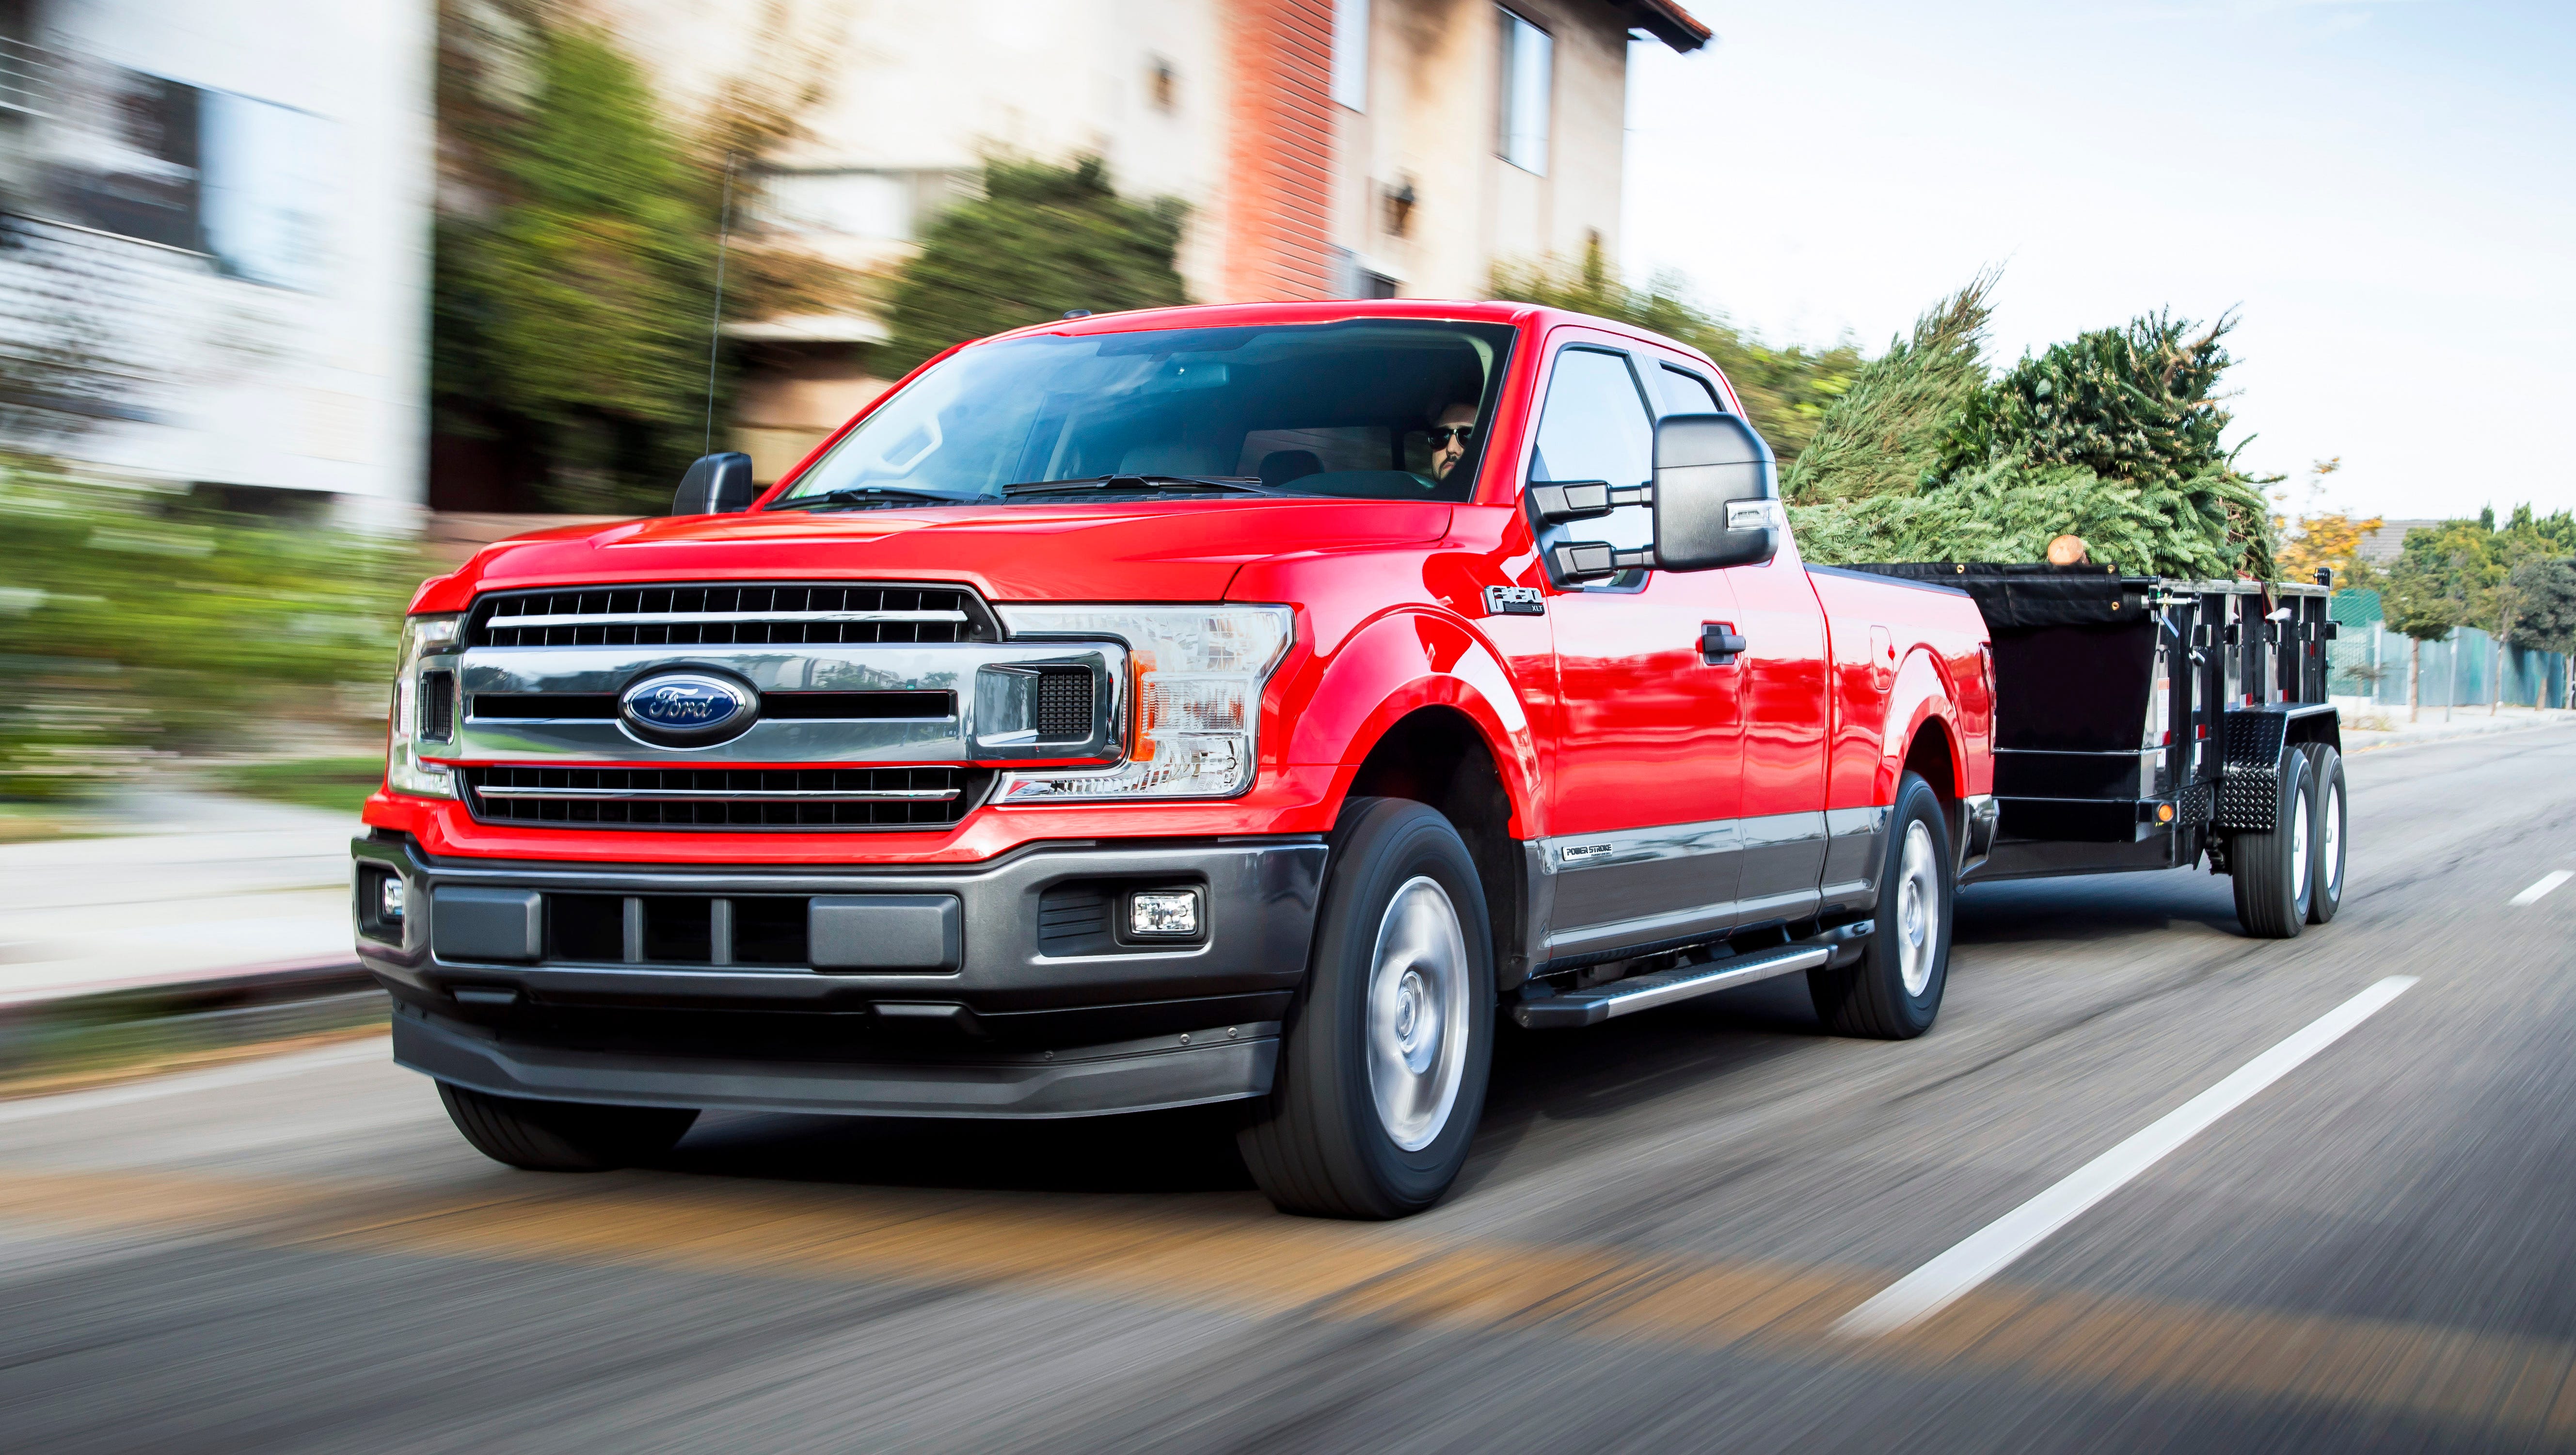 The Ford F-150 with a  3.0-liter Power Stroke diesel engine targeted to return an EPA-estimated rating of 30 mpg highway.